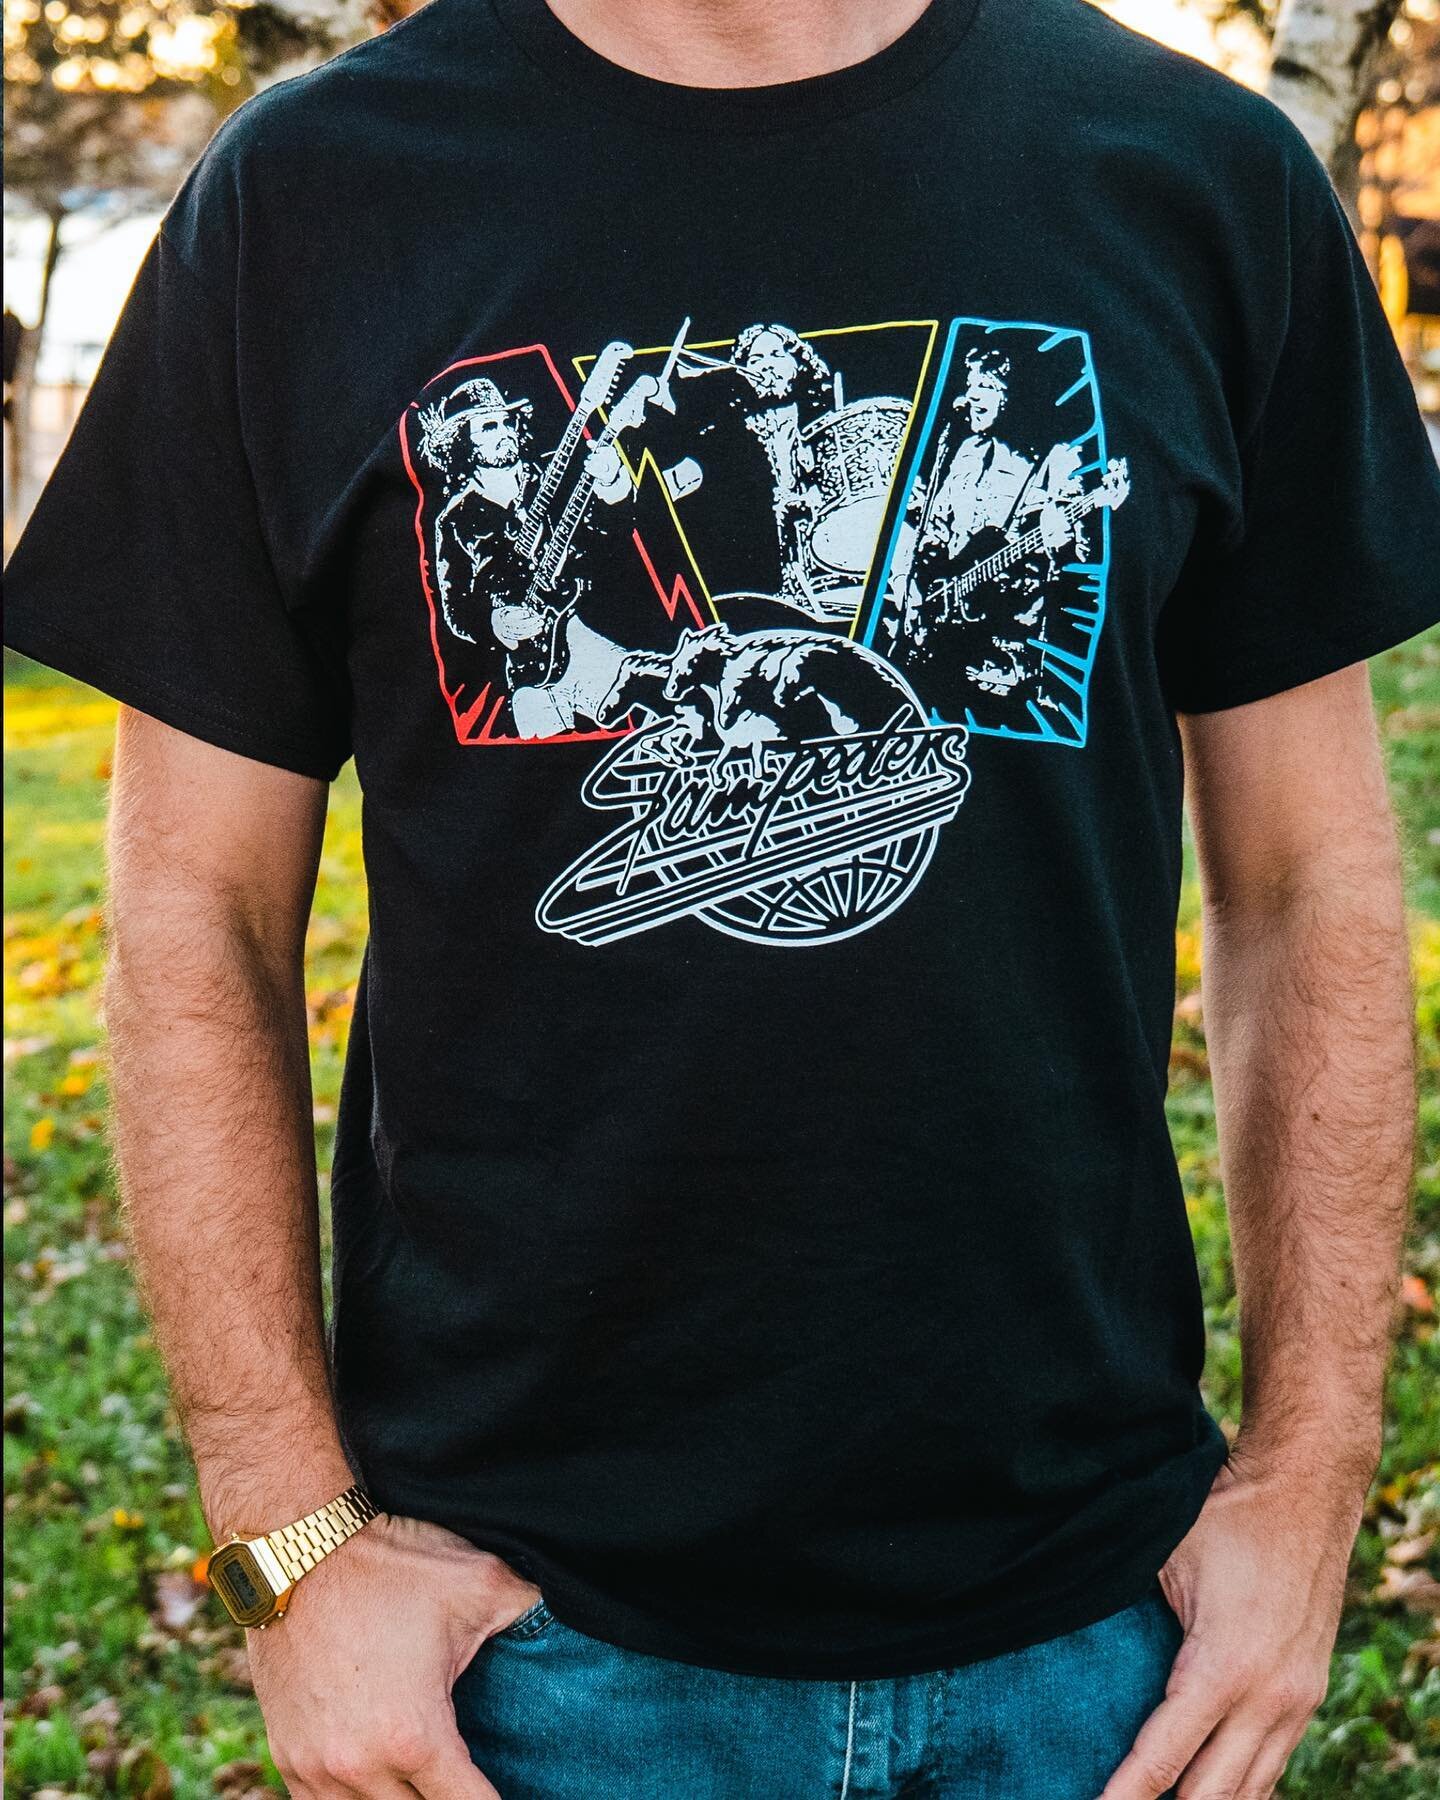 Check out our exciting new vintage rockers t-shirt! You can pick one up at any of our shows on our Prairies Tour and take home a momento of Canadian Rock &amp; Roll history. They&rsquo;ll also be available to order online at thestampeders.com/store w